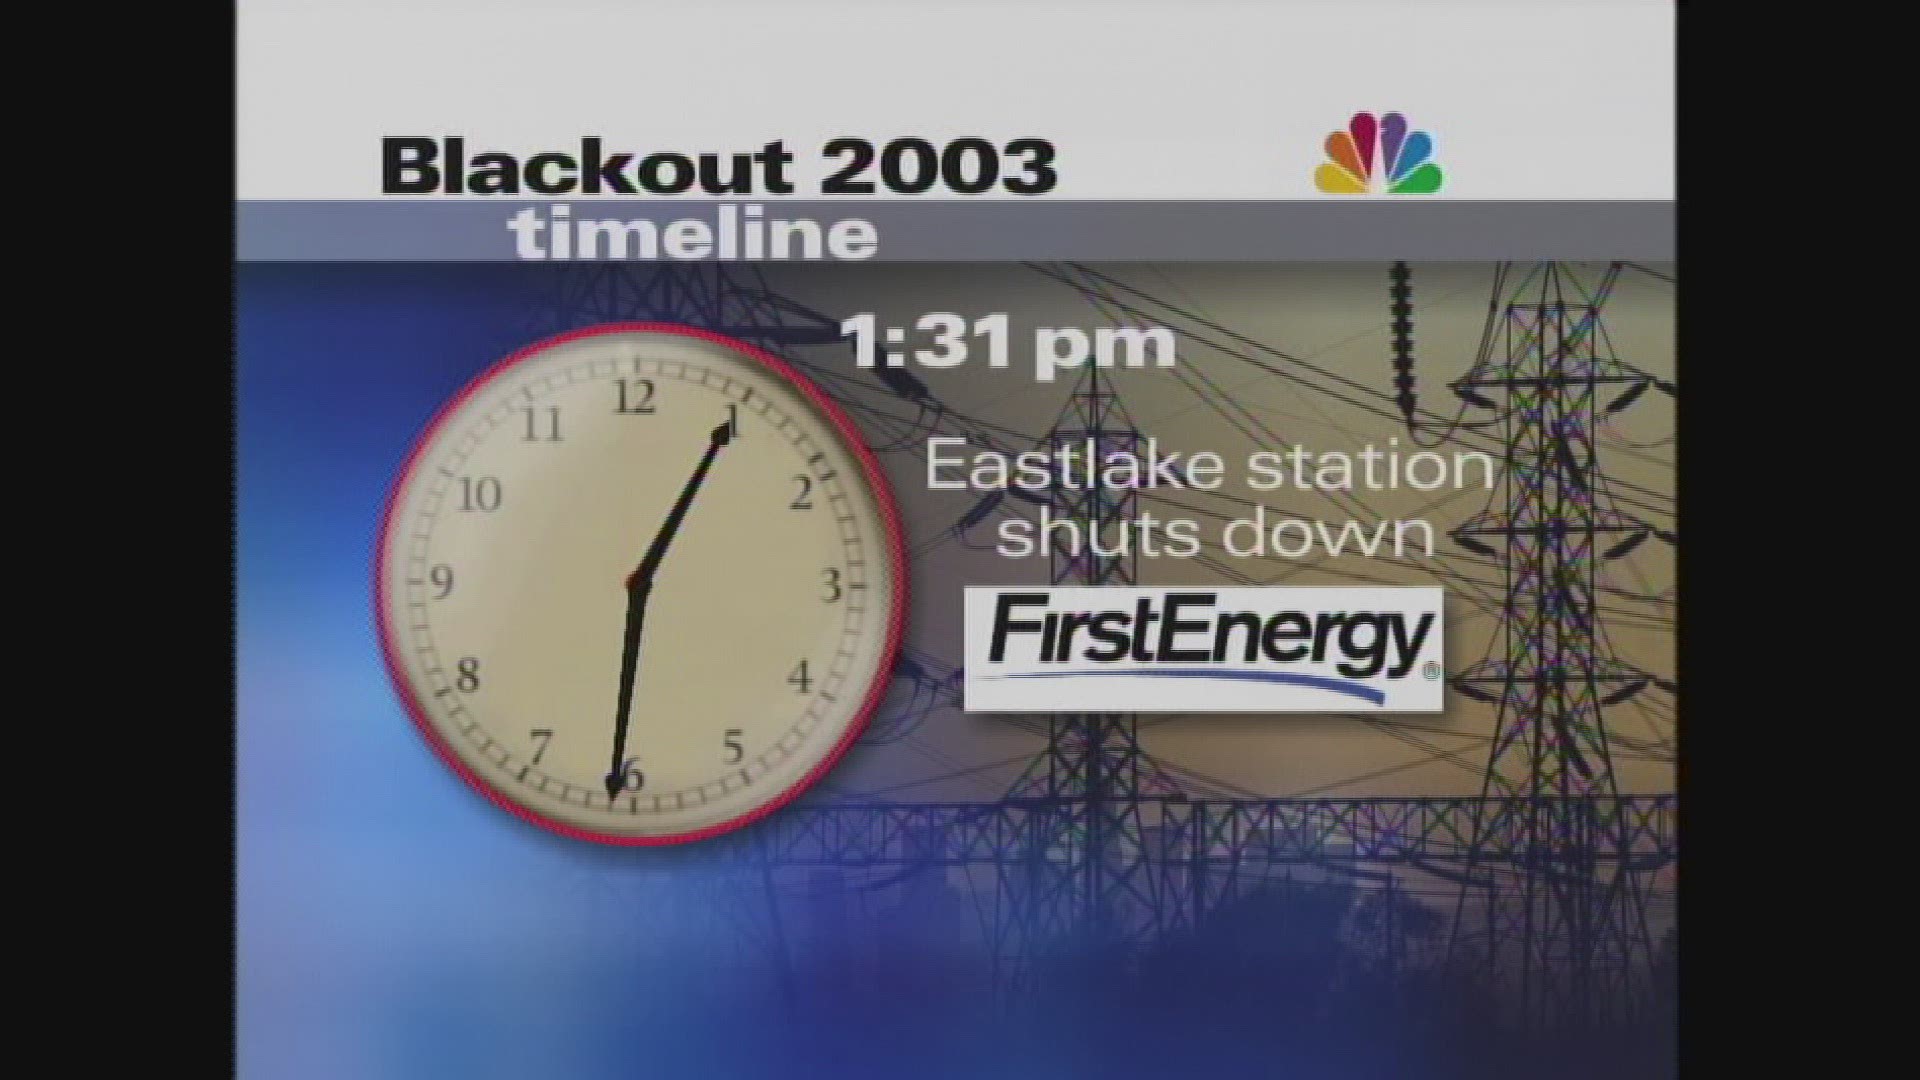 Aug. 14, 2018: Here's a look back at archive footage from WKYC when the big blackout hit America 15 years ago.